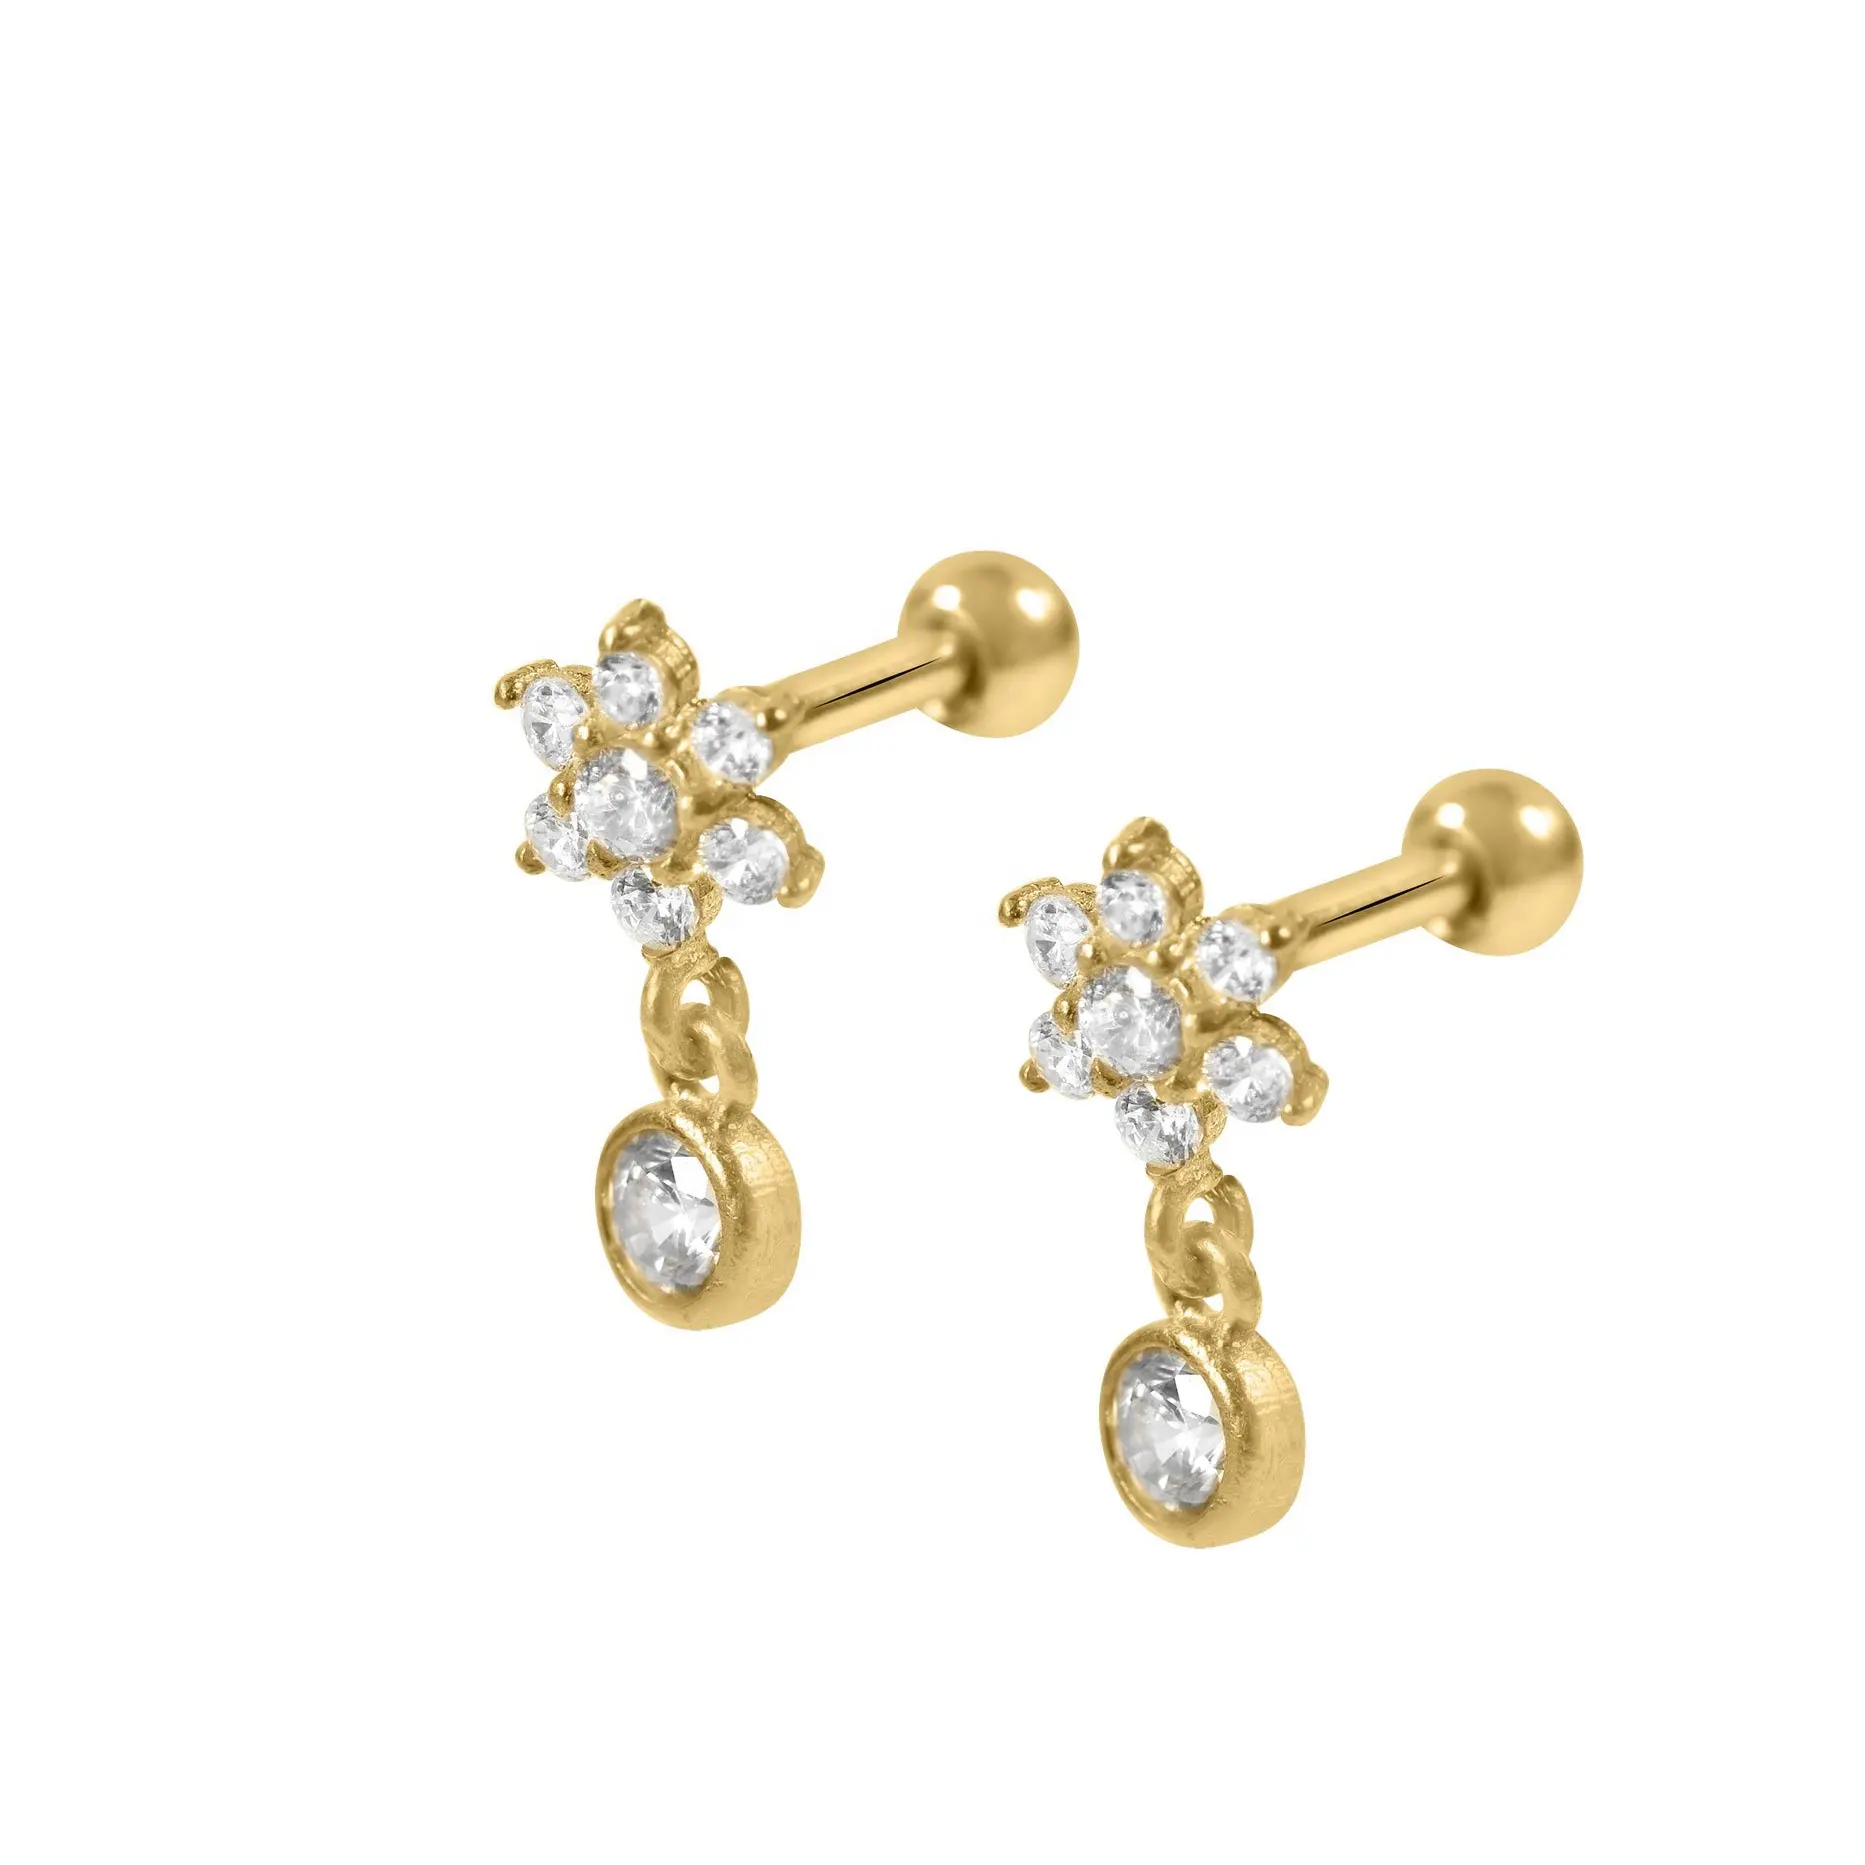 Best selling 18k gold plated 925 sterling silver squash blossom earrings